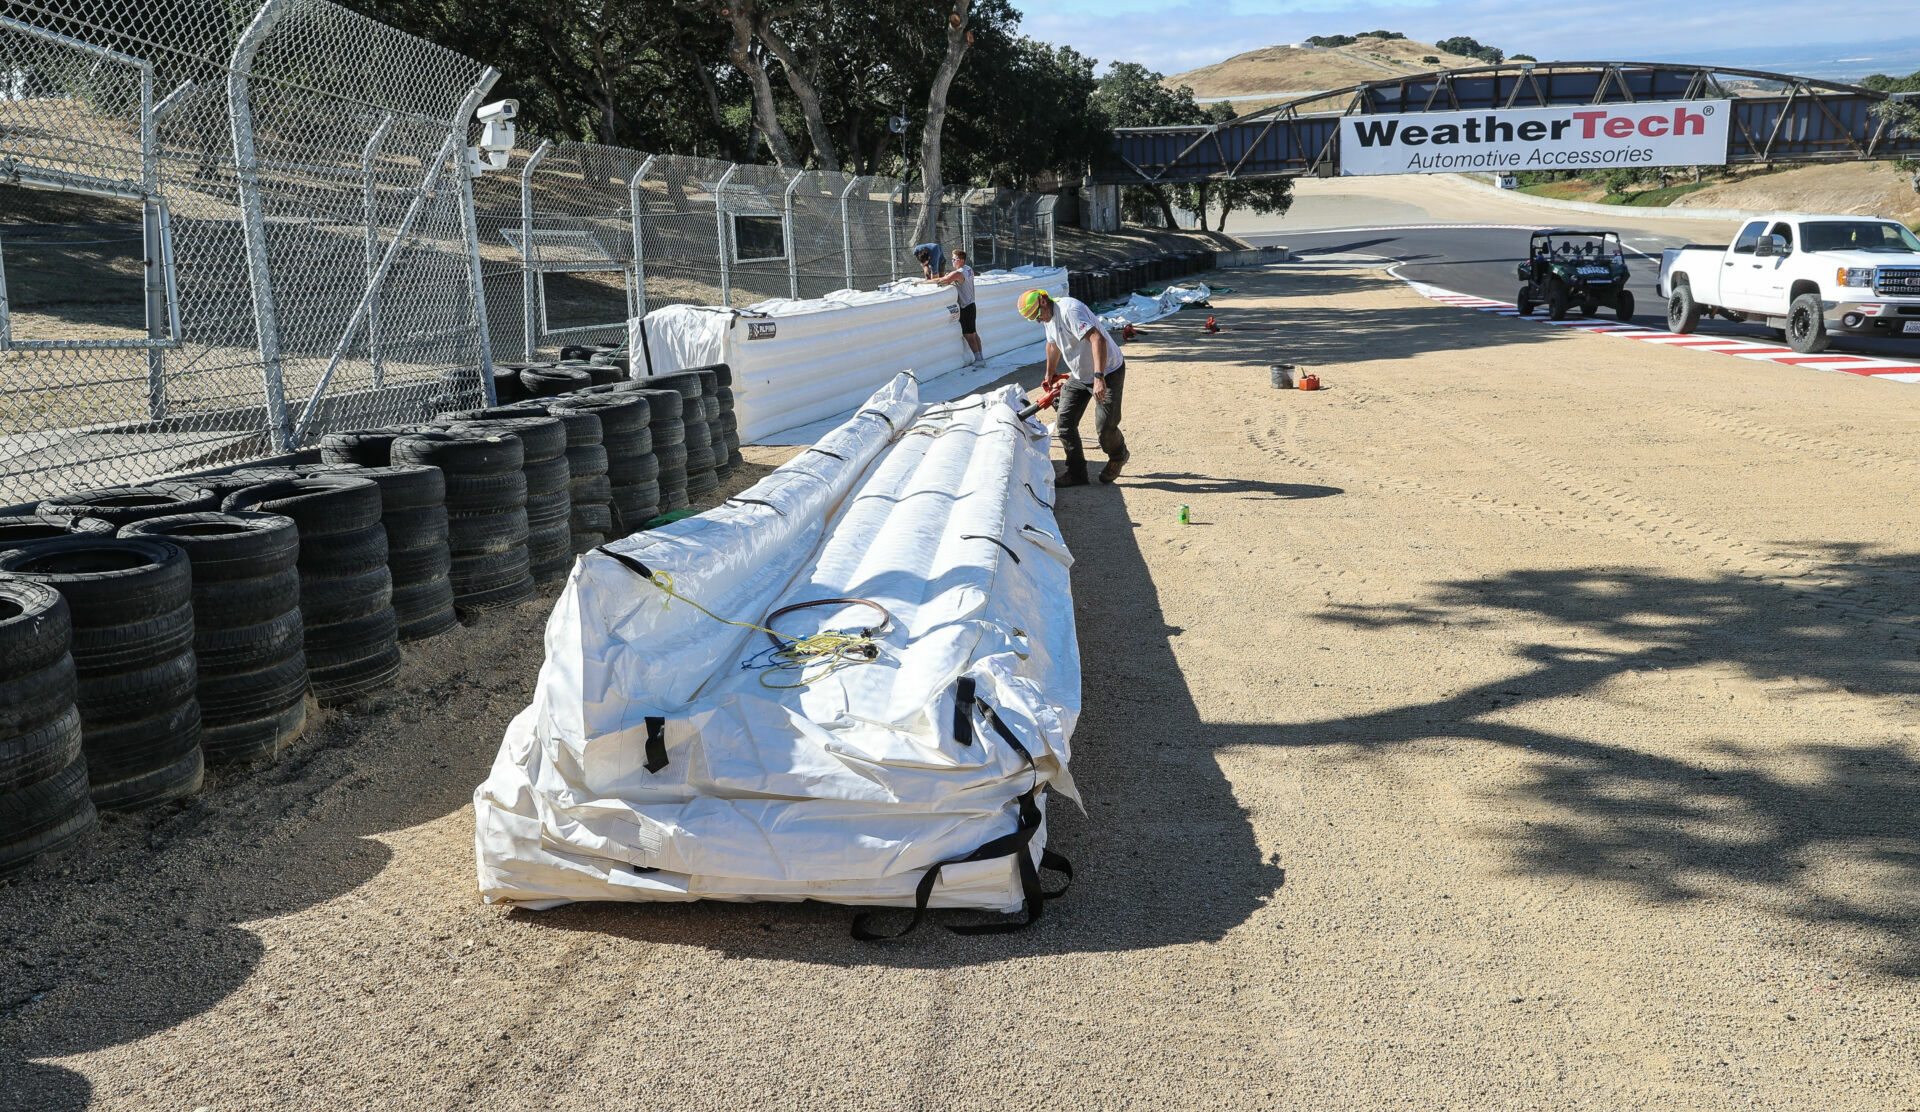 Inflatable sections of Alpina safety barriers being put into place ahead of the MotoAmerica races at WeatherTech Raceway Laguna Seca. Photo by Brian J. Nelson.